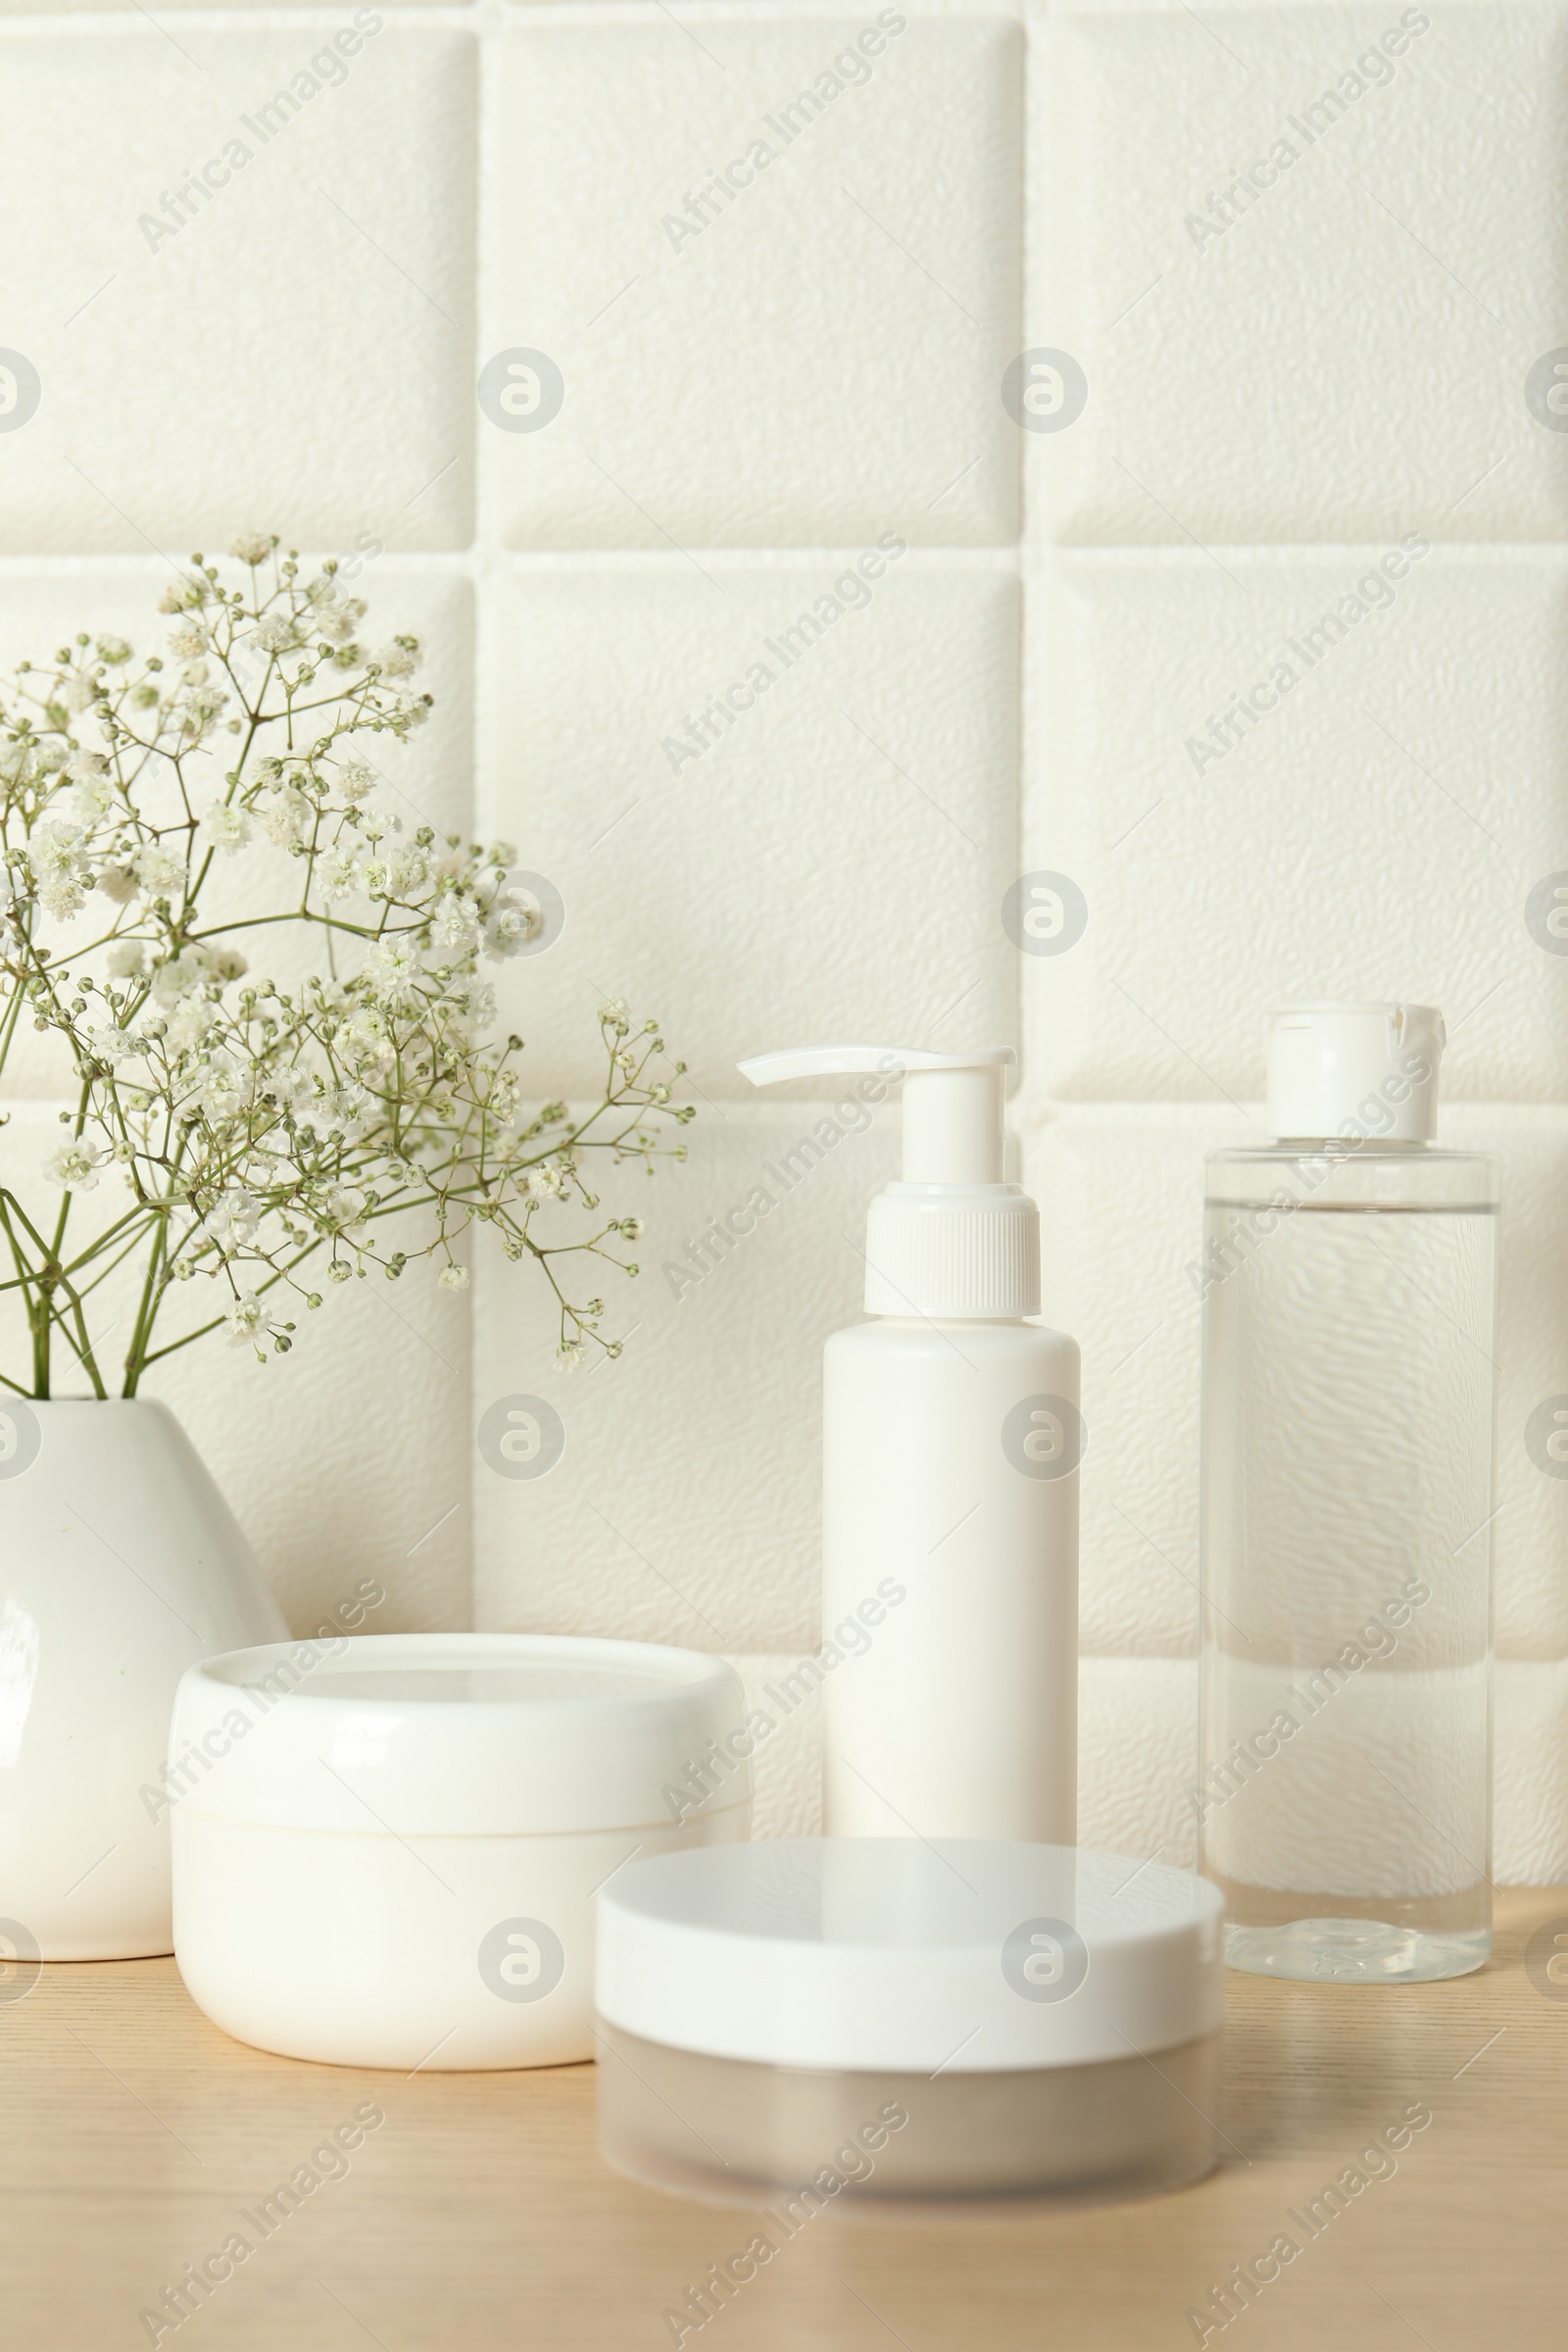 Photo of Bath accessories. Different personal care products and gypsophila flowers in vase on wooden table near white tiled wall